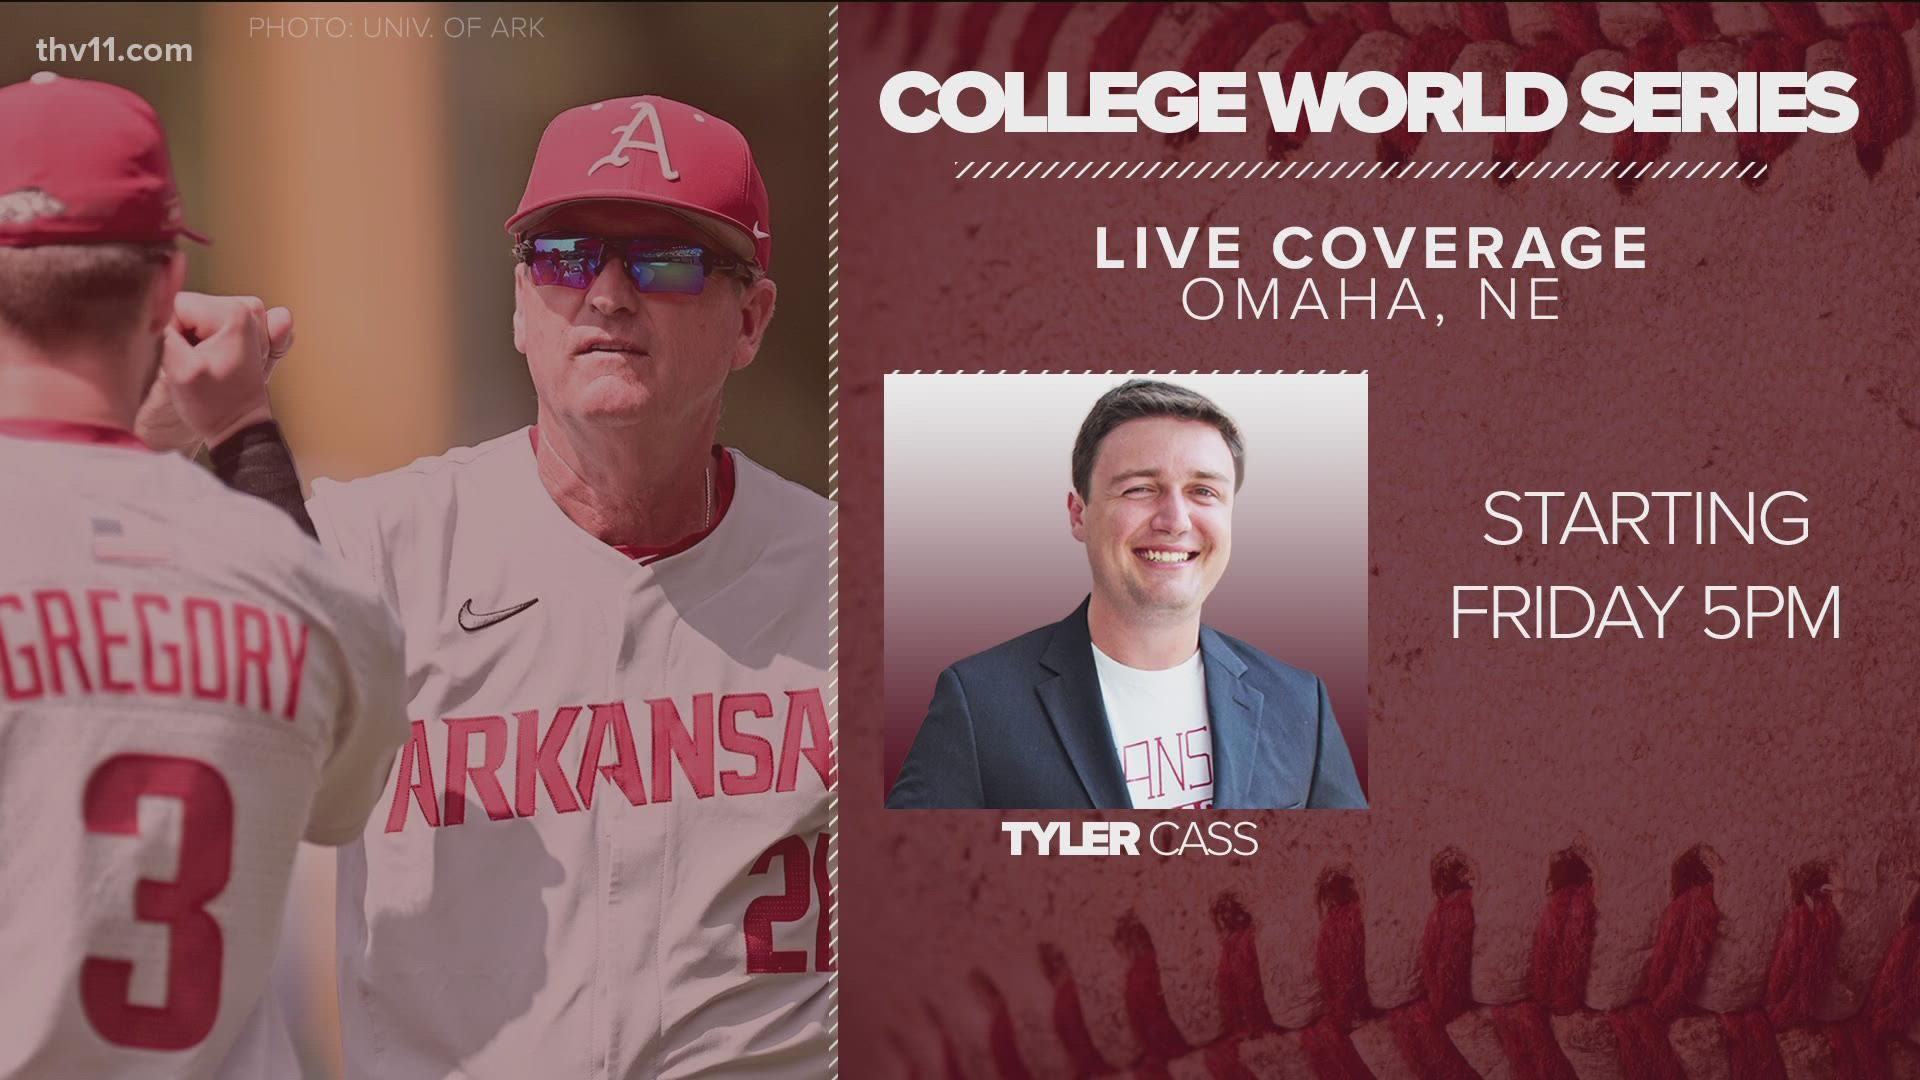 Our very own Tyler Cass will be heading to Omaha as the Hogs are set to battle in the College World Series.